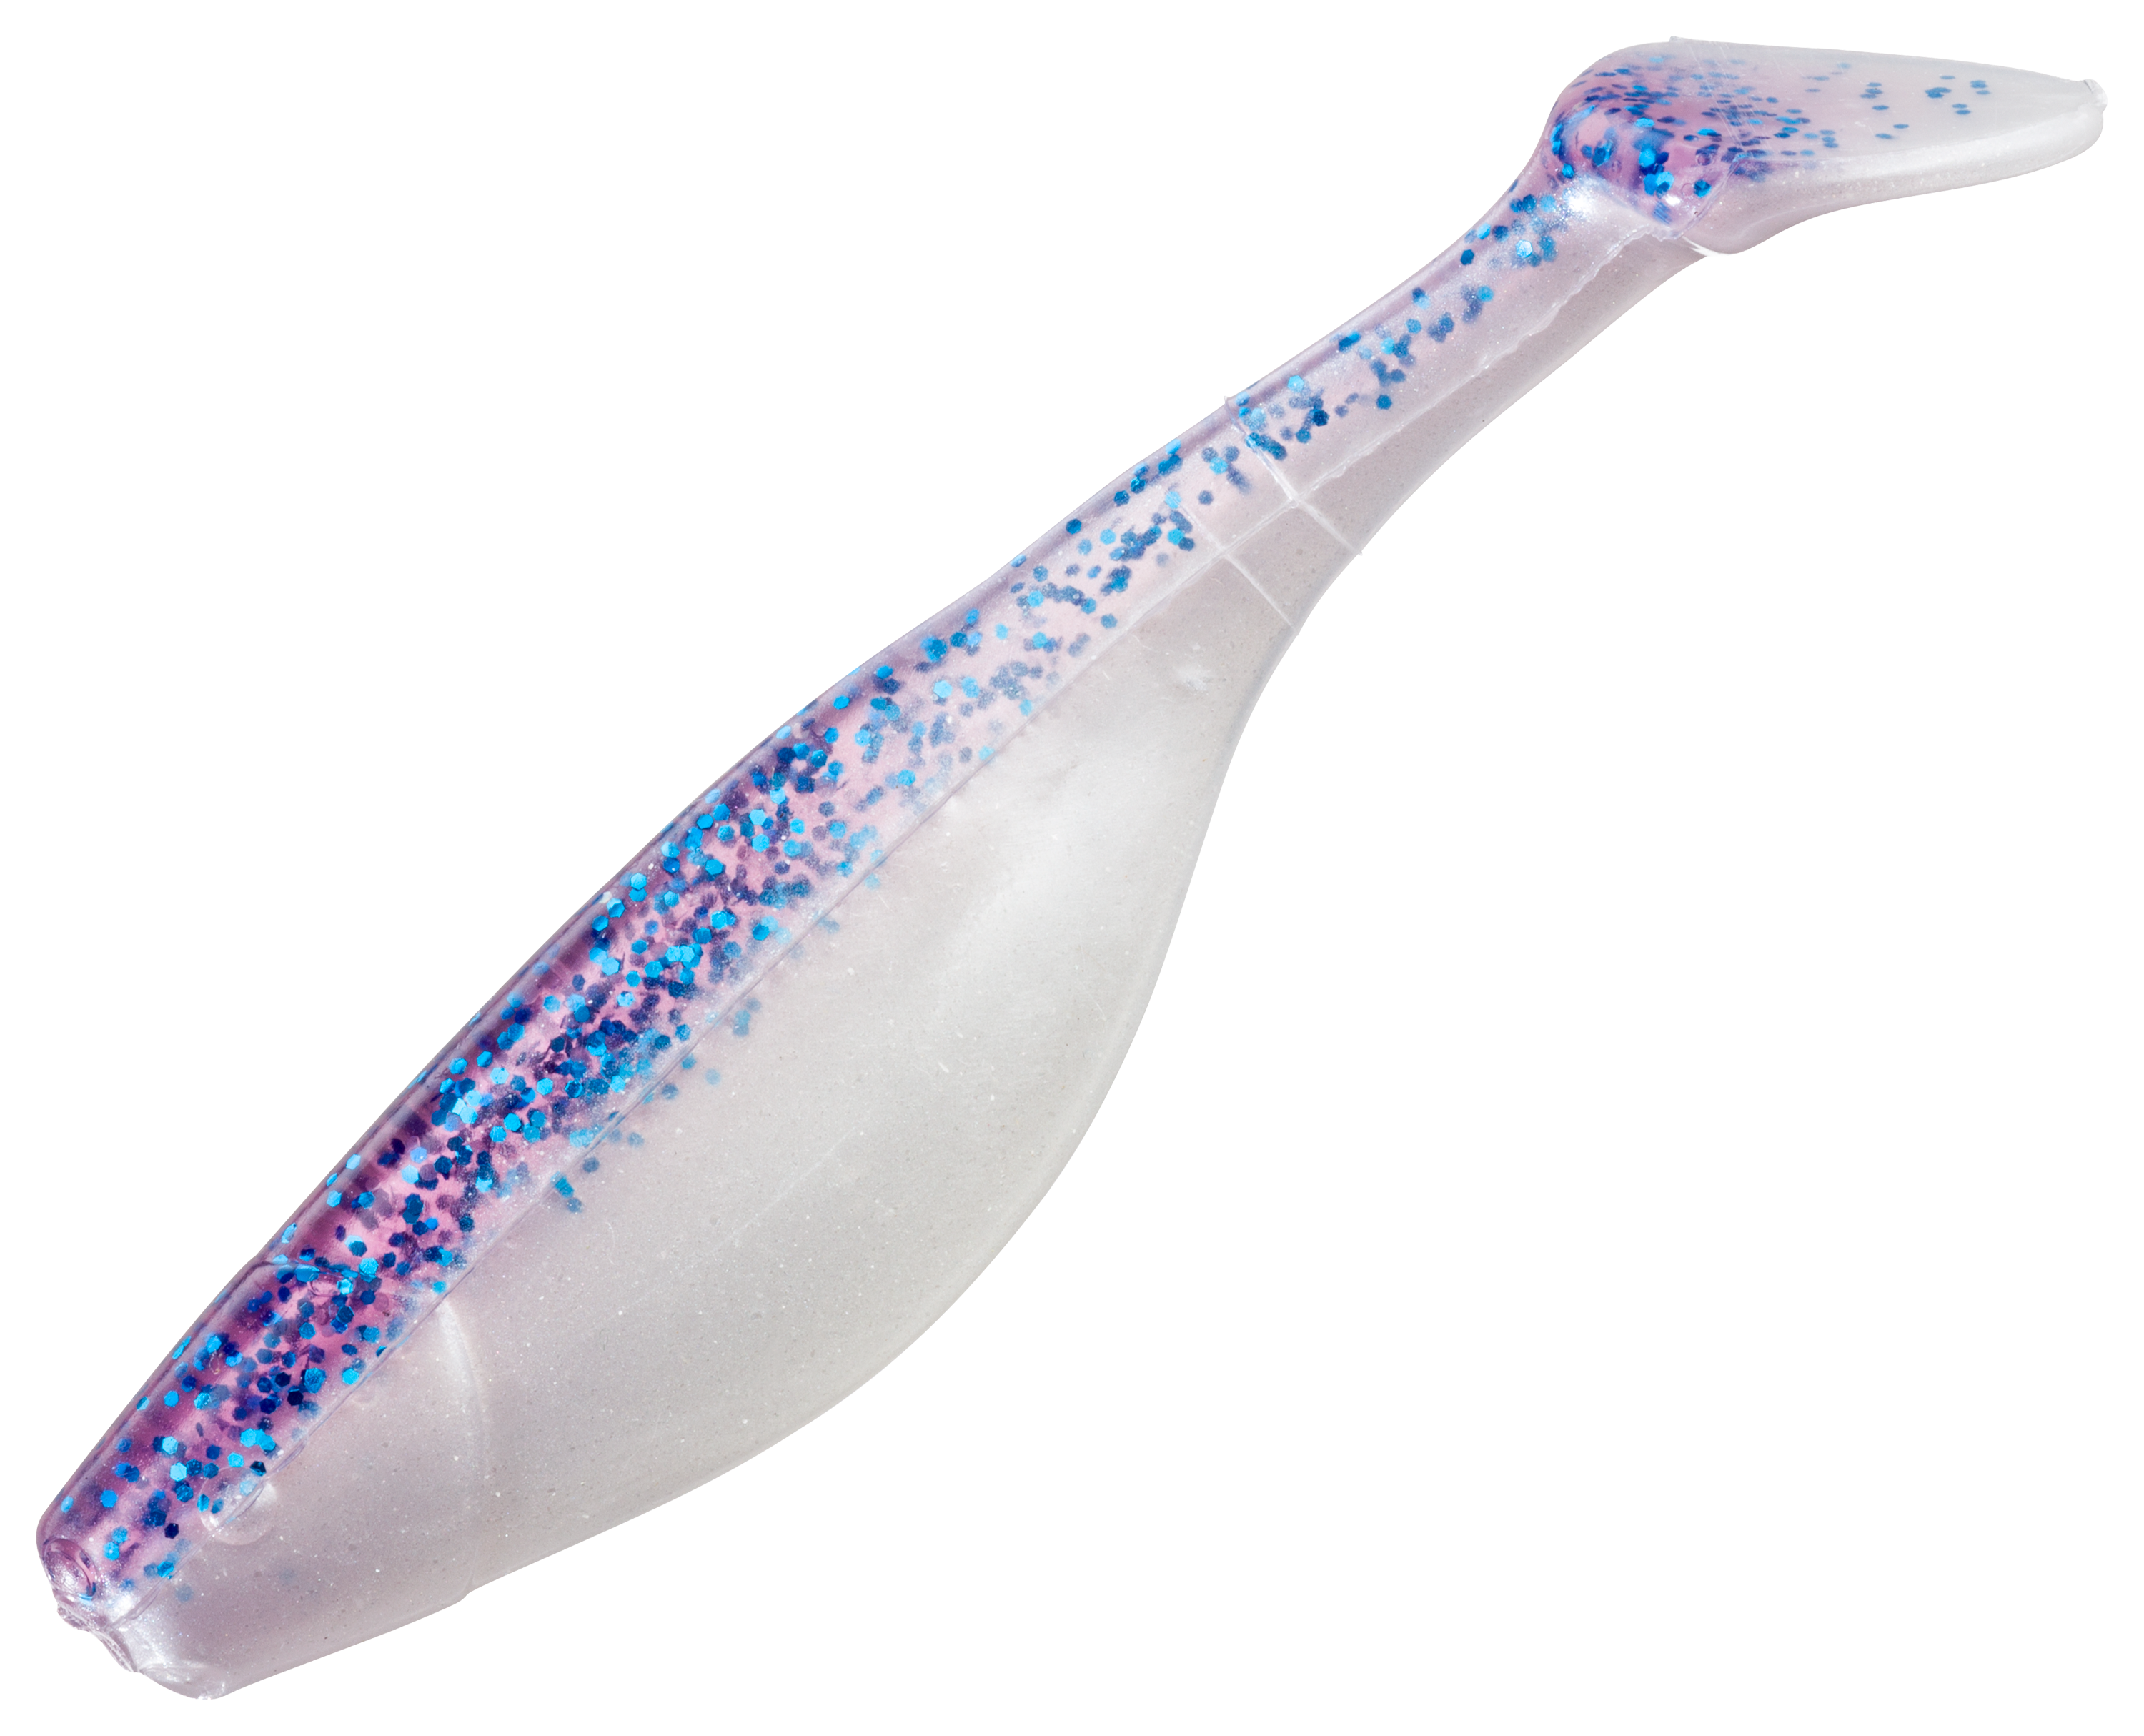 Bass Pro Shops Action Tail Shad - Electric Grape/Pearl Belly - 3